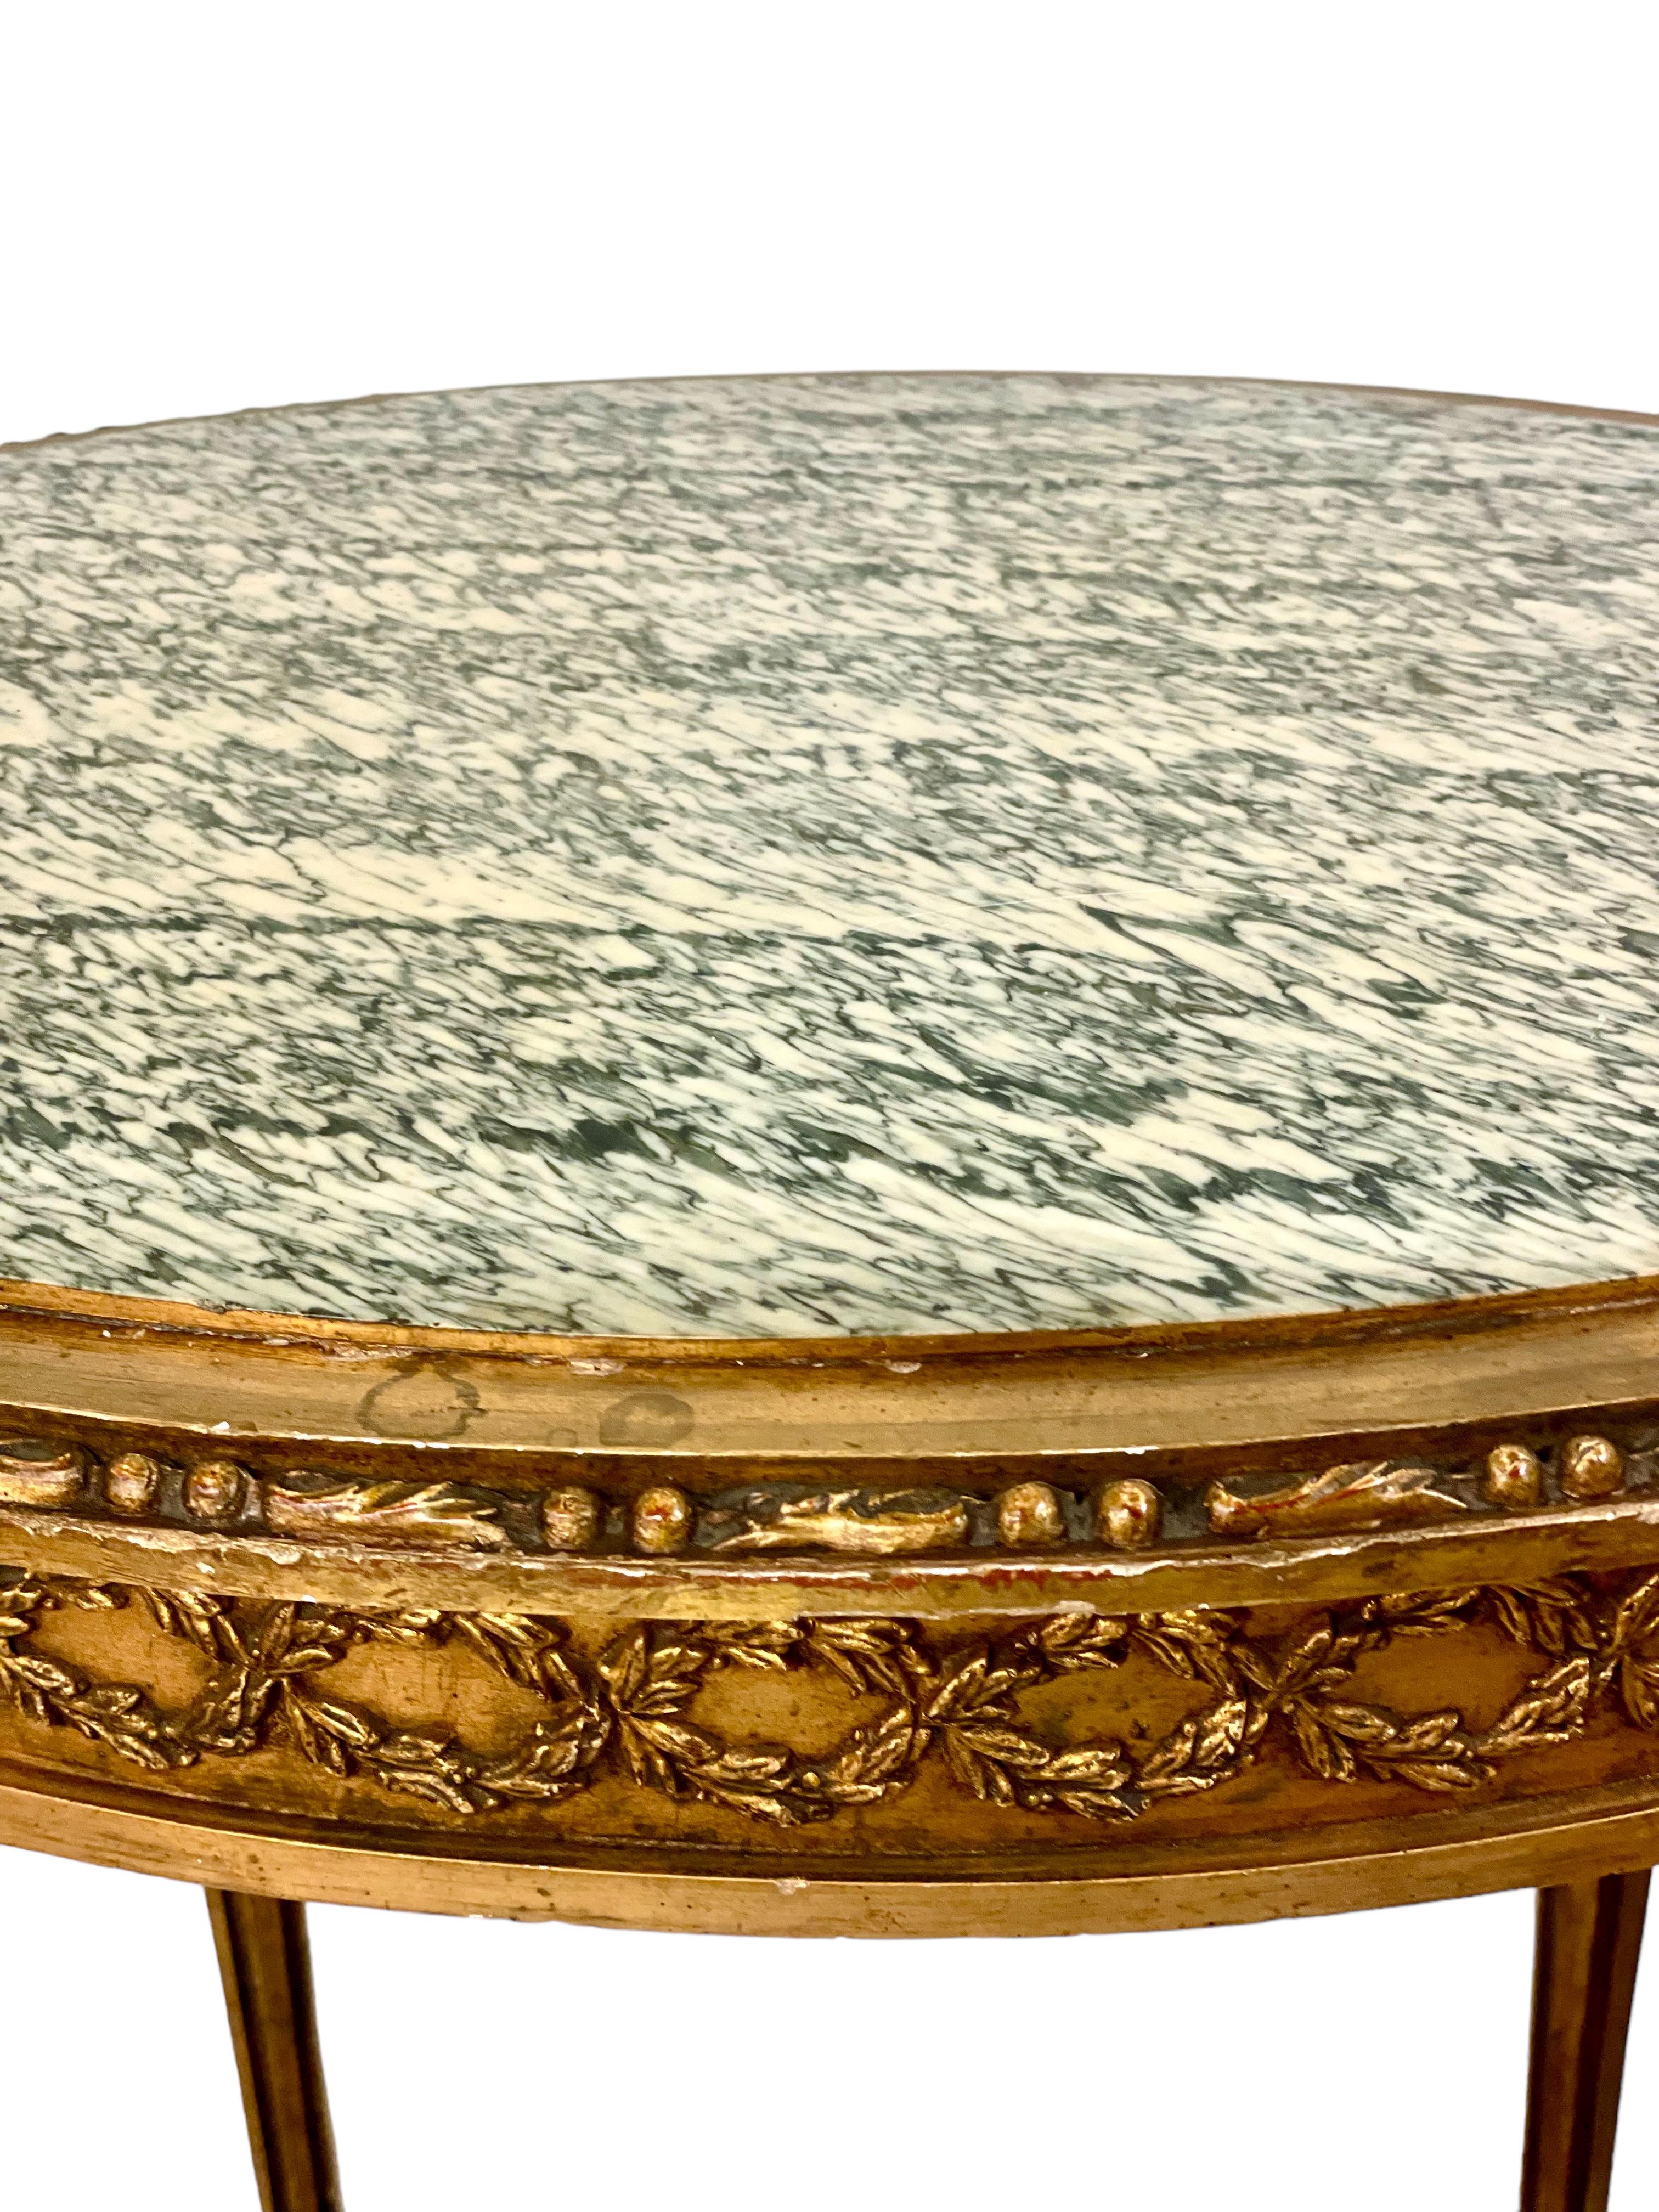 19th Century French Louis XVI Gilt Center Table with Marble Top For Sale 2